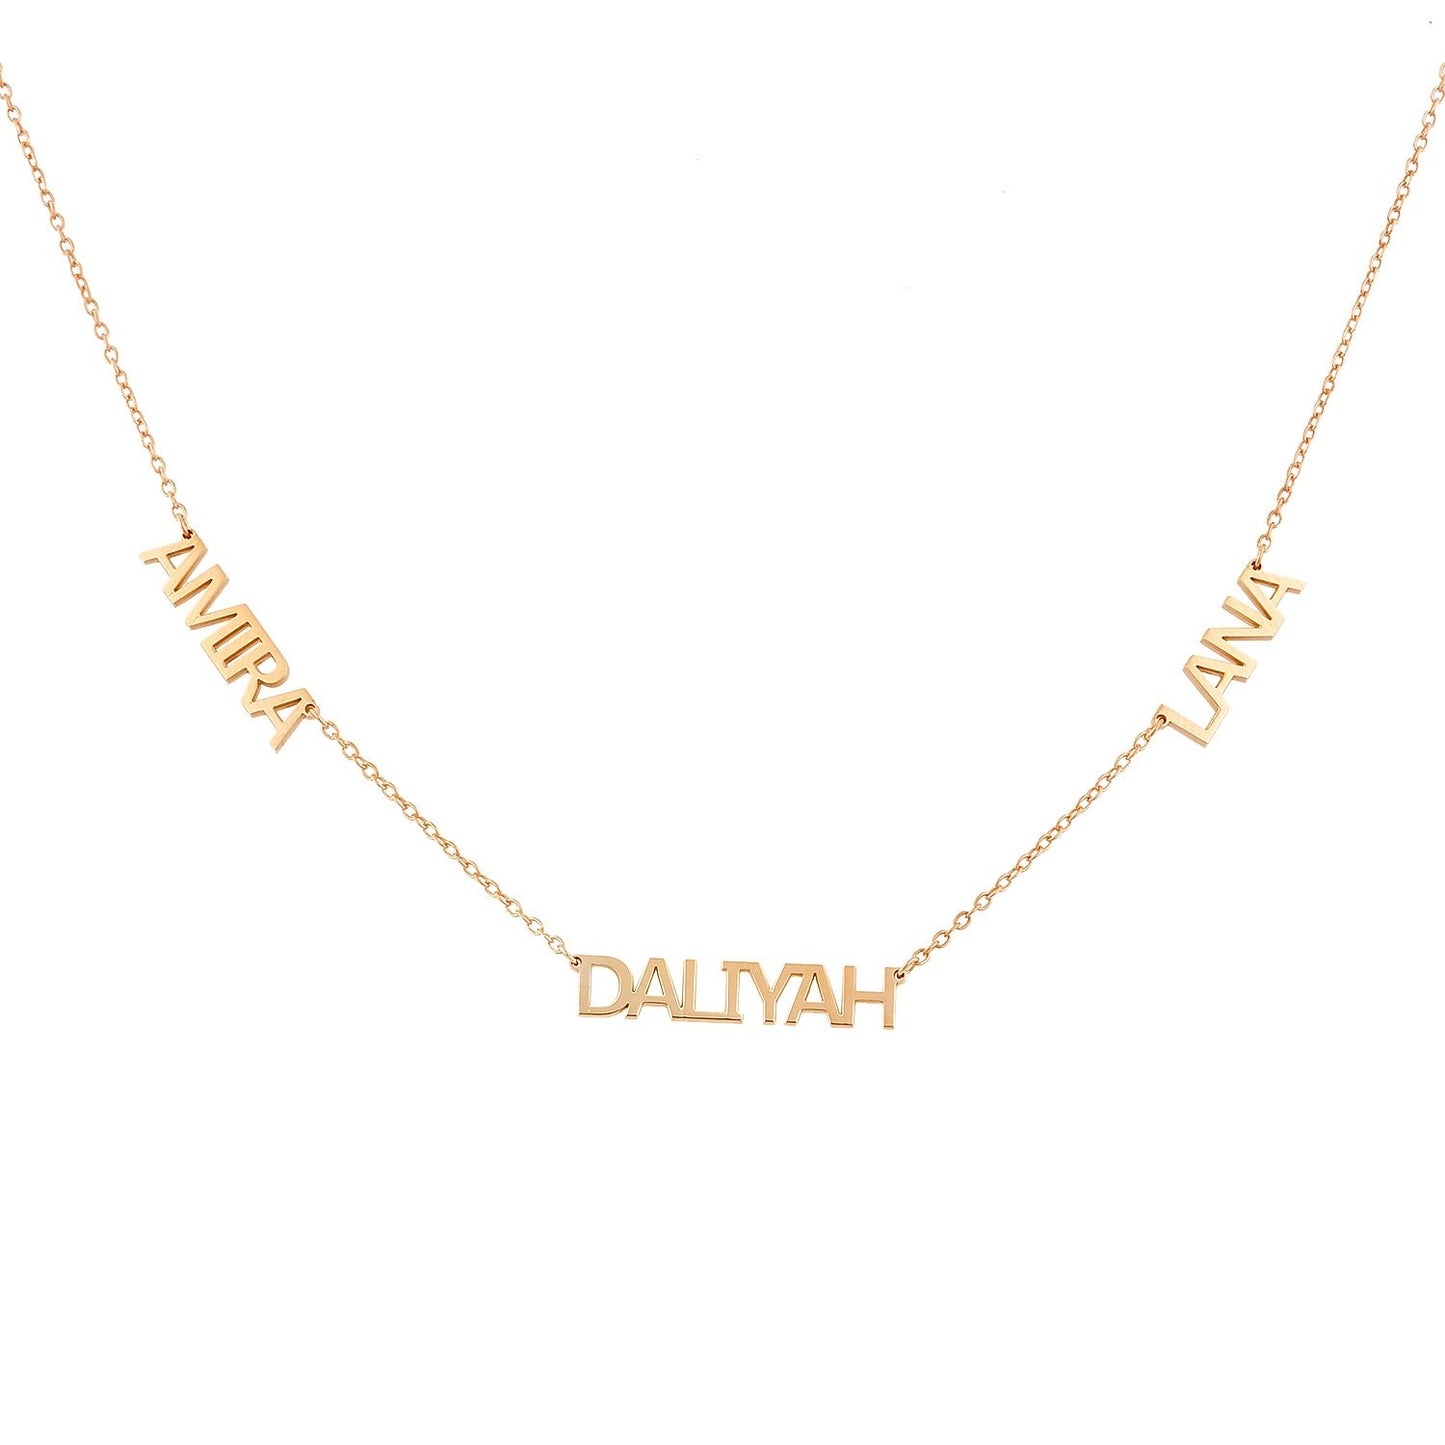 TSK 14K My Mantra/Name Necklace JEWELRY The Sis Kiss Classic Mantra Style Rose Gold Three